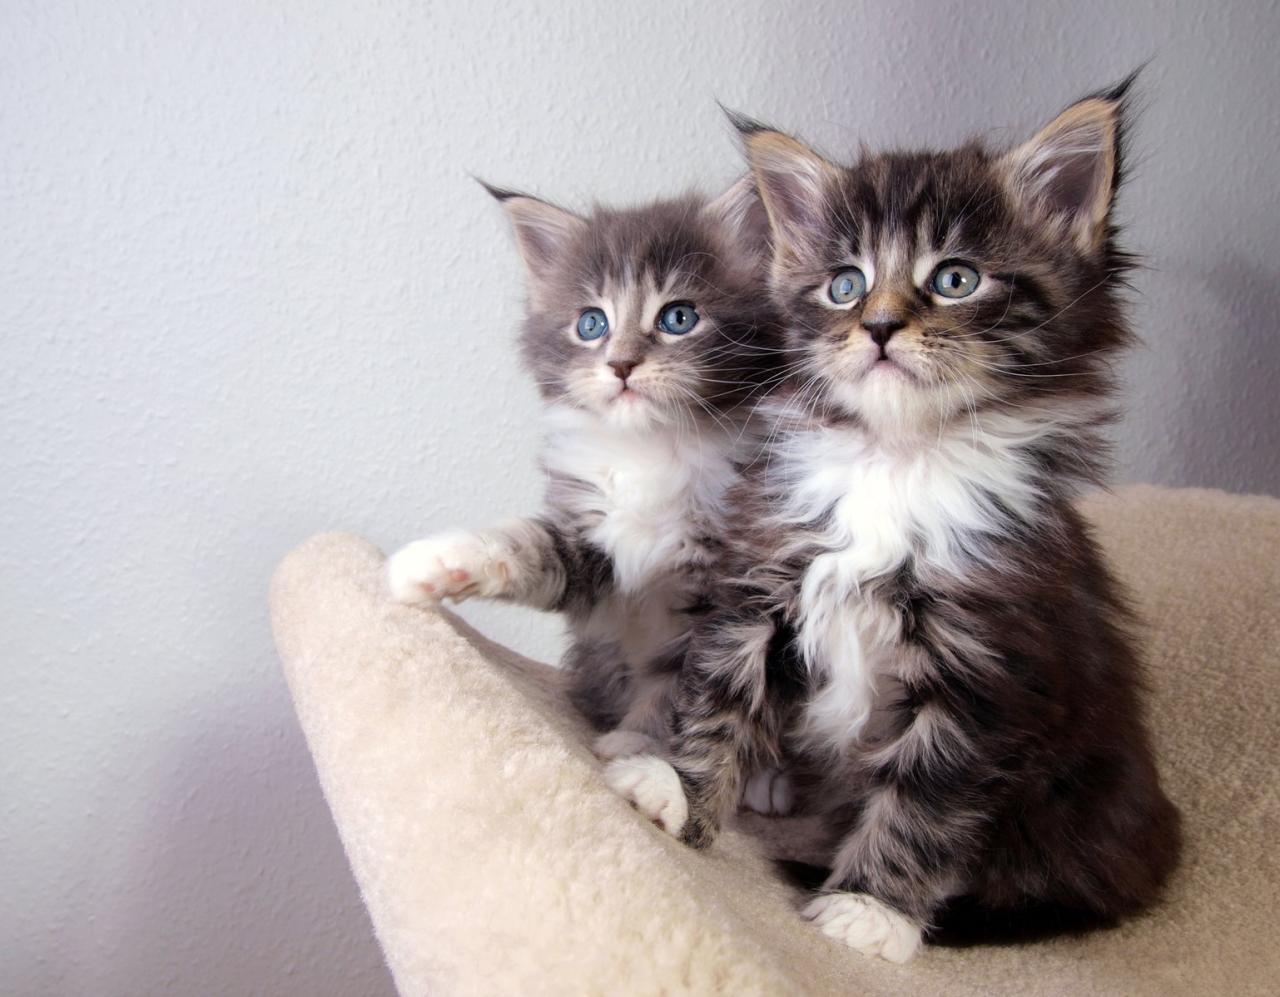 Russian maine coon kittens for sale